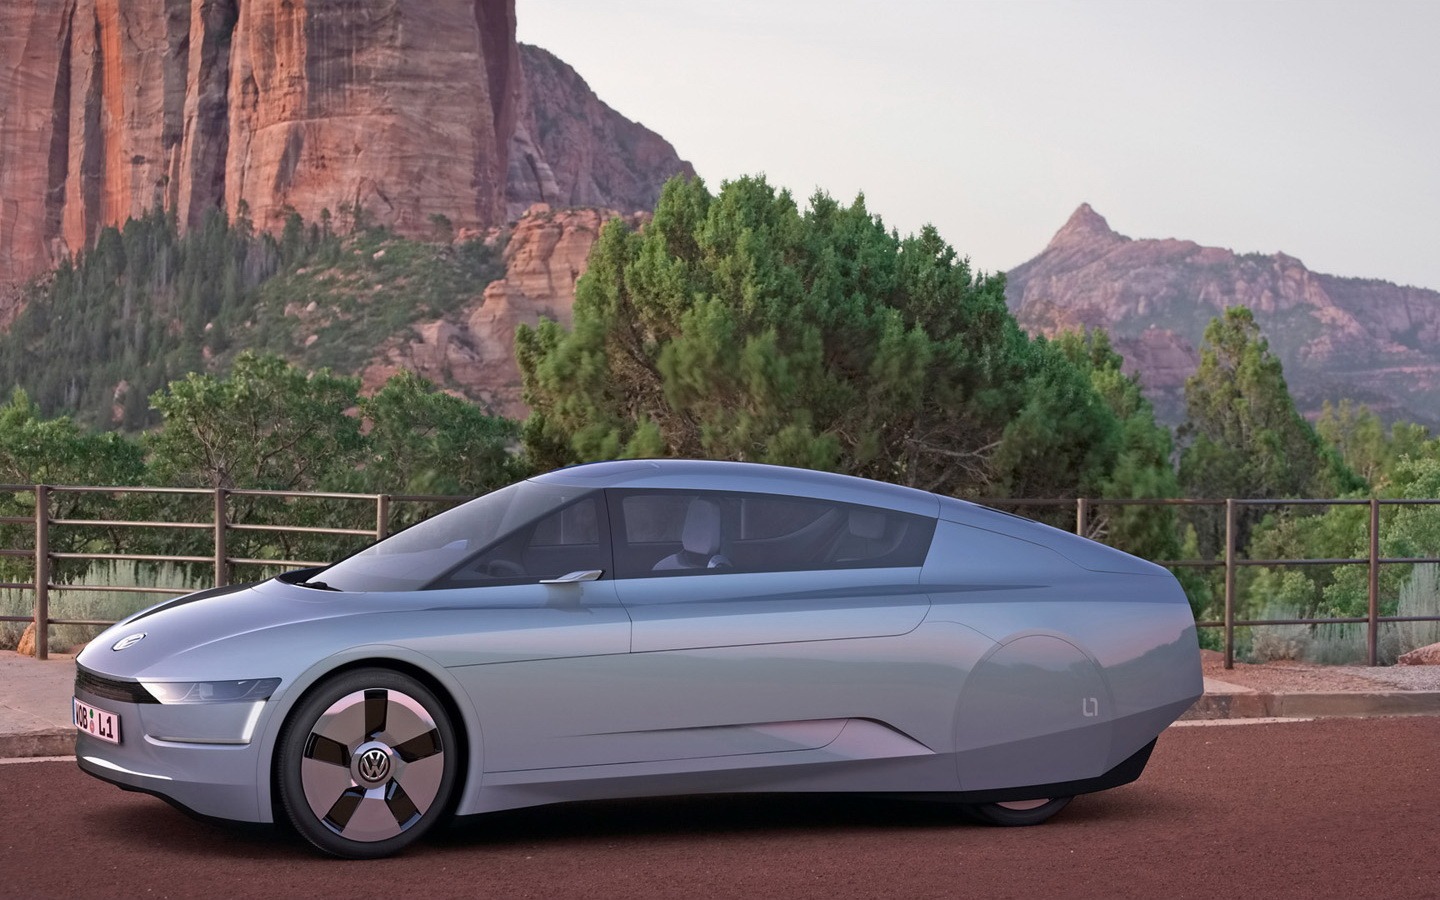 Volkswagen L1 Tapety Concept Car #19 - 1440x900